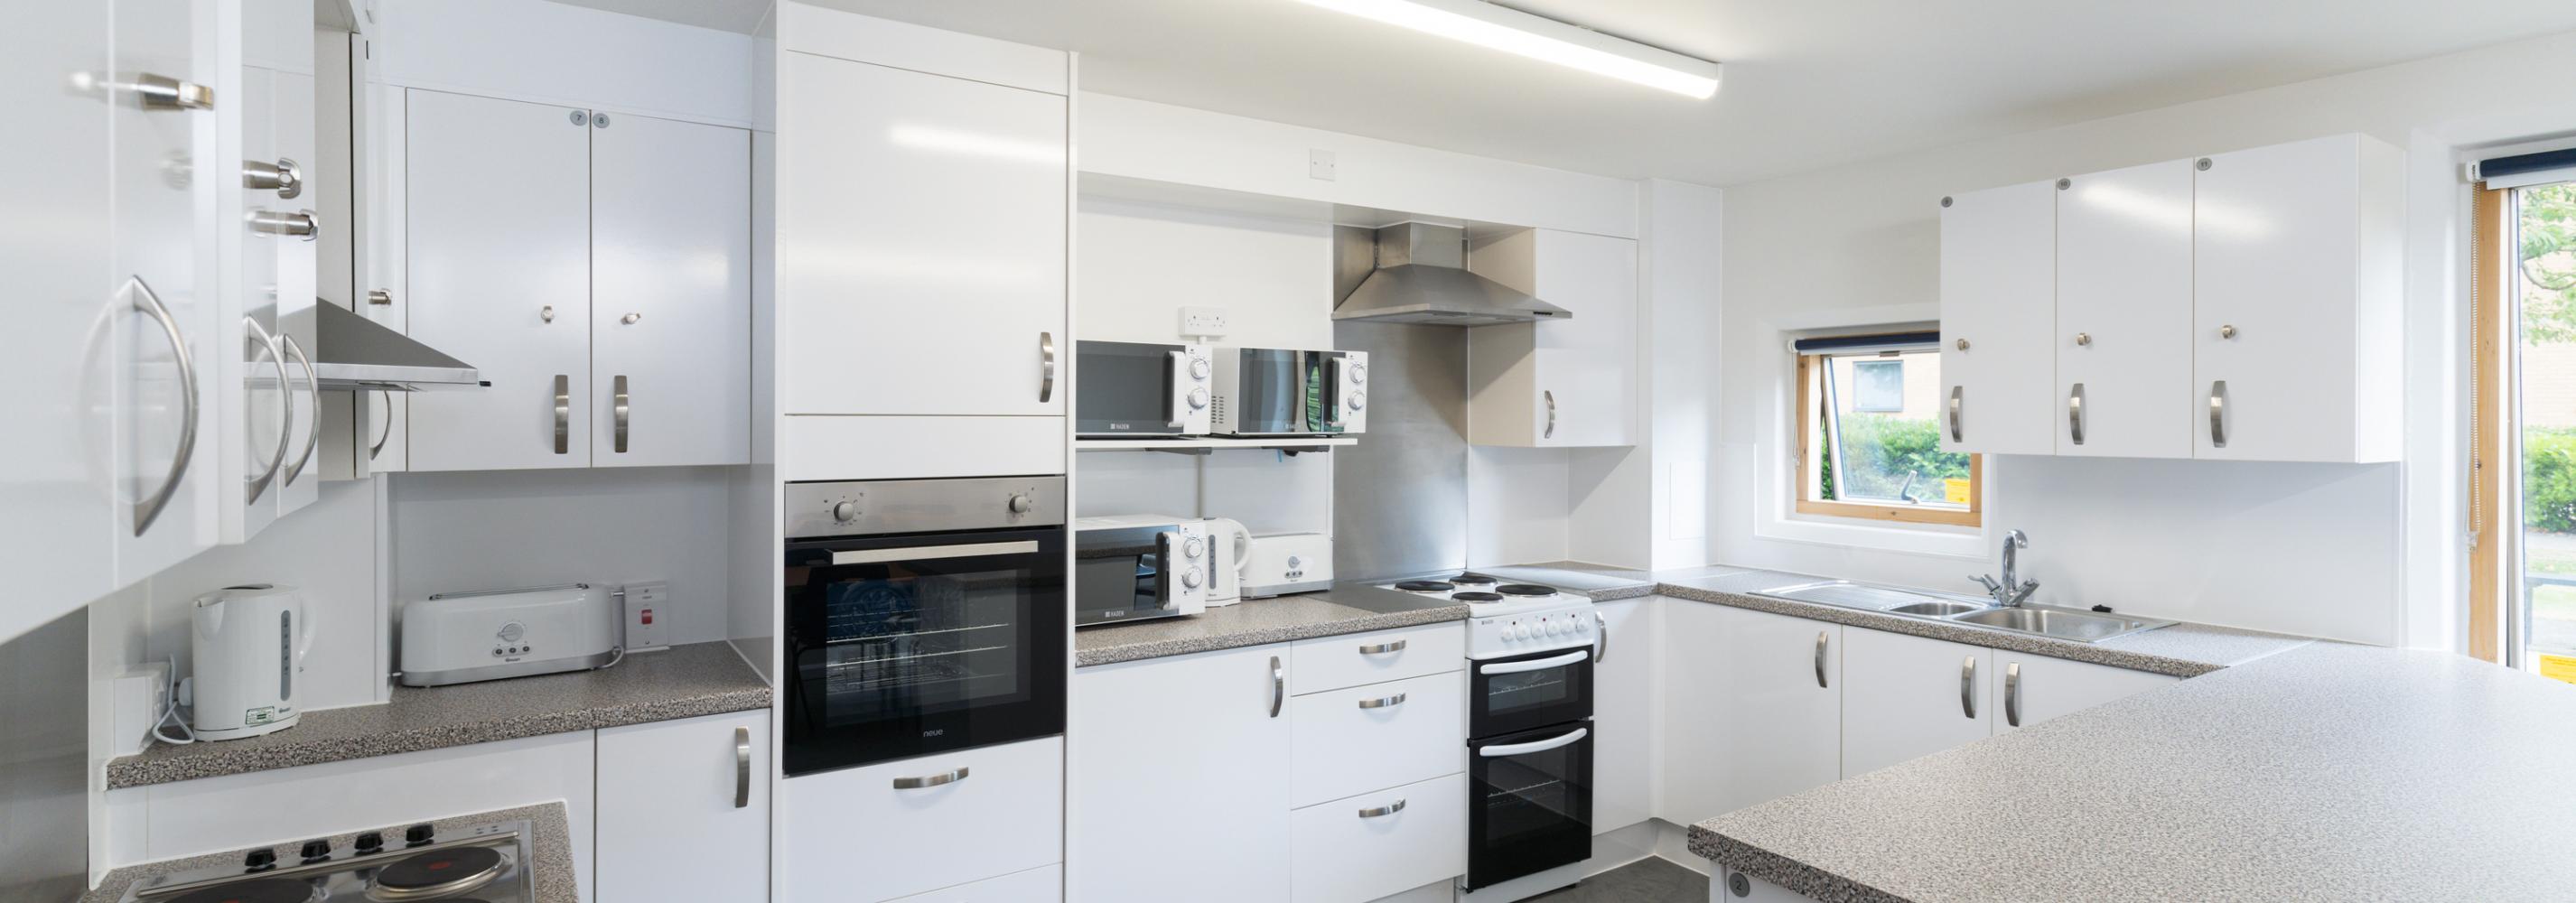 de Havilland shared kitchen, with two ovens, two microwaves and lockable shelves